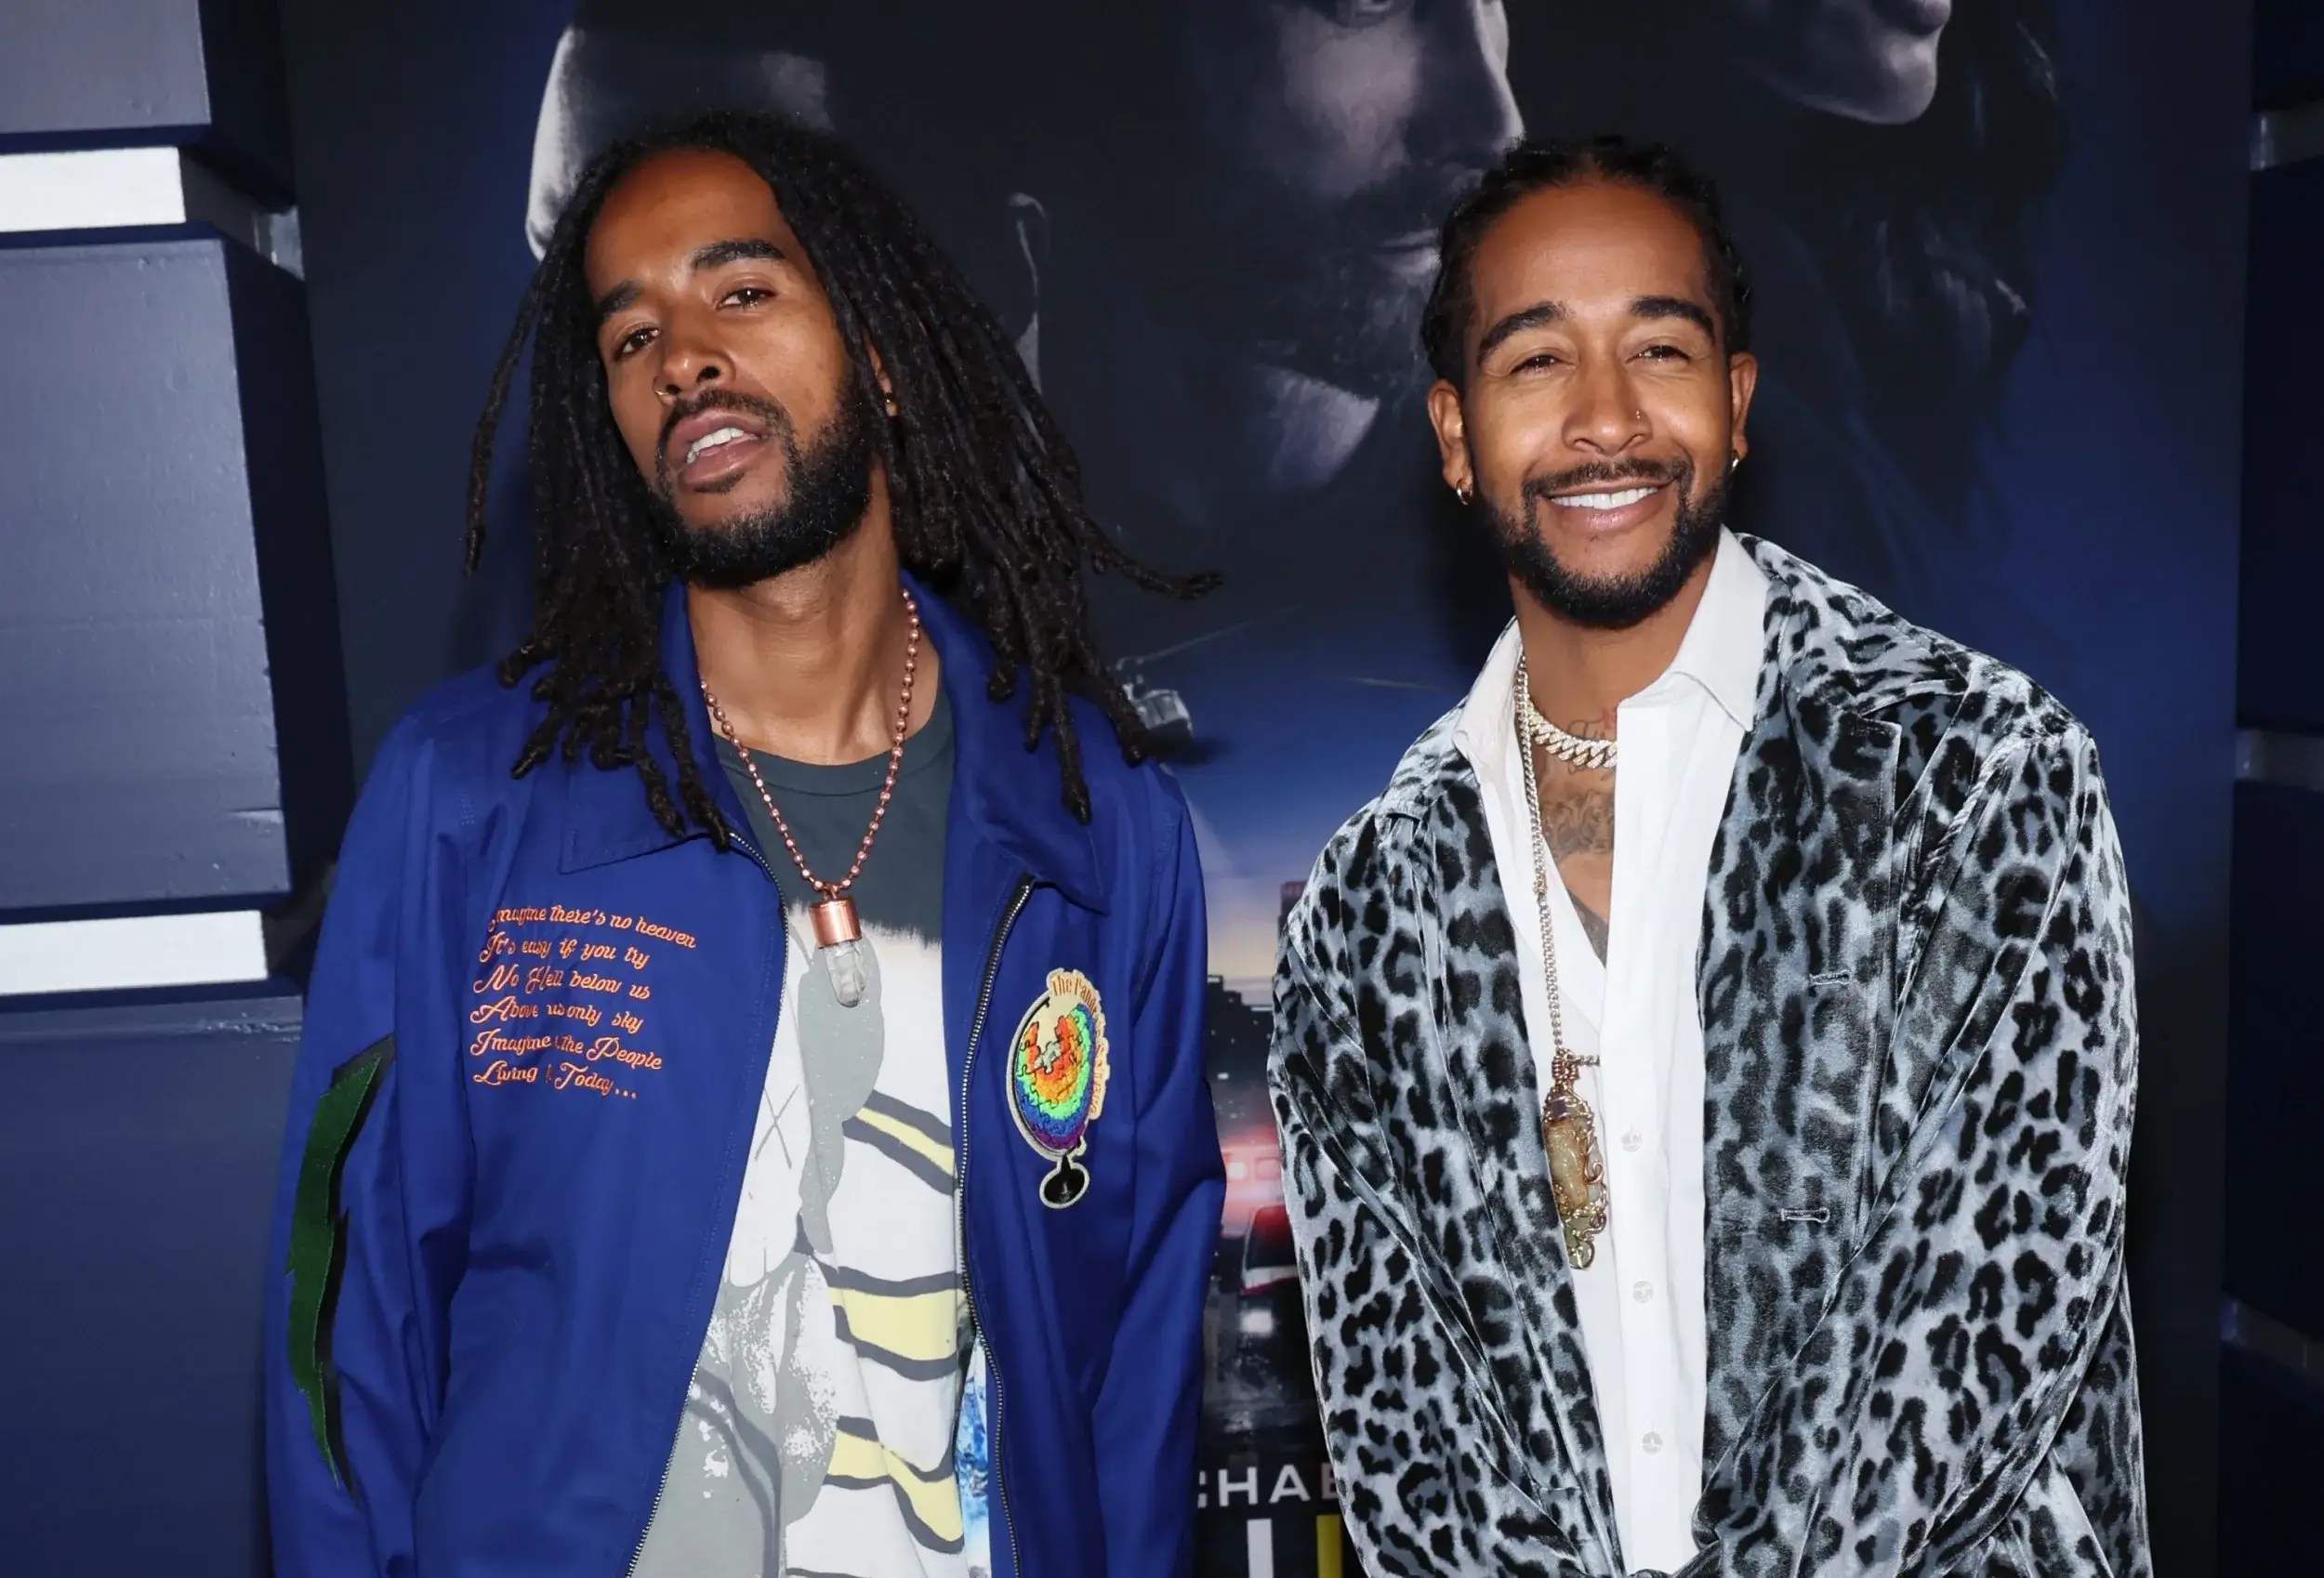 Omarion and his brother, O'Ryan